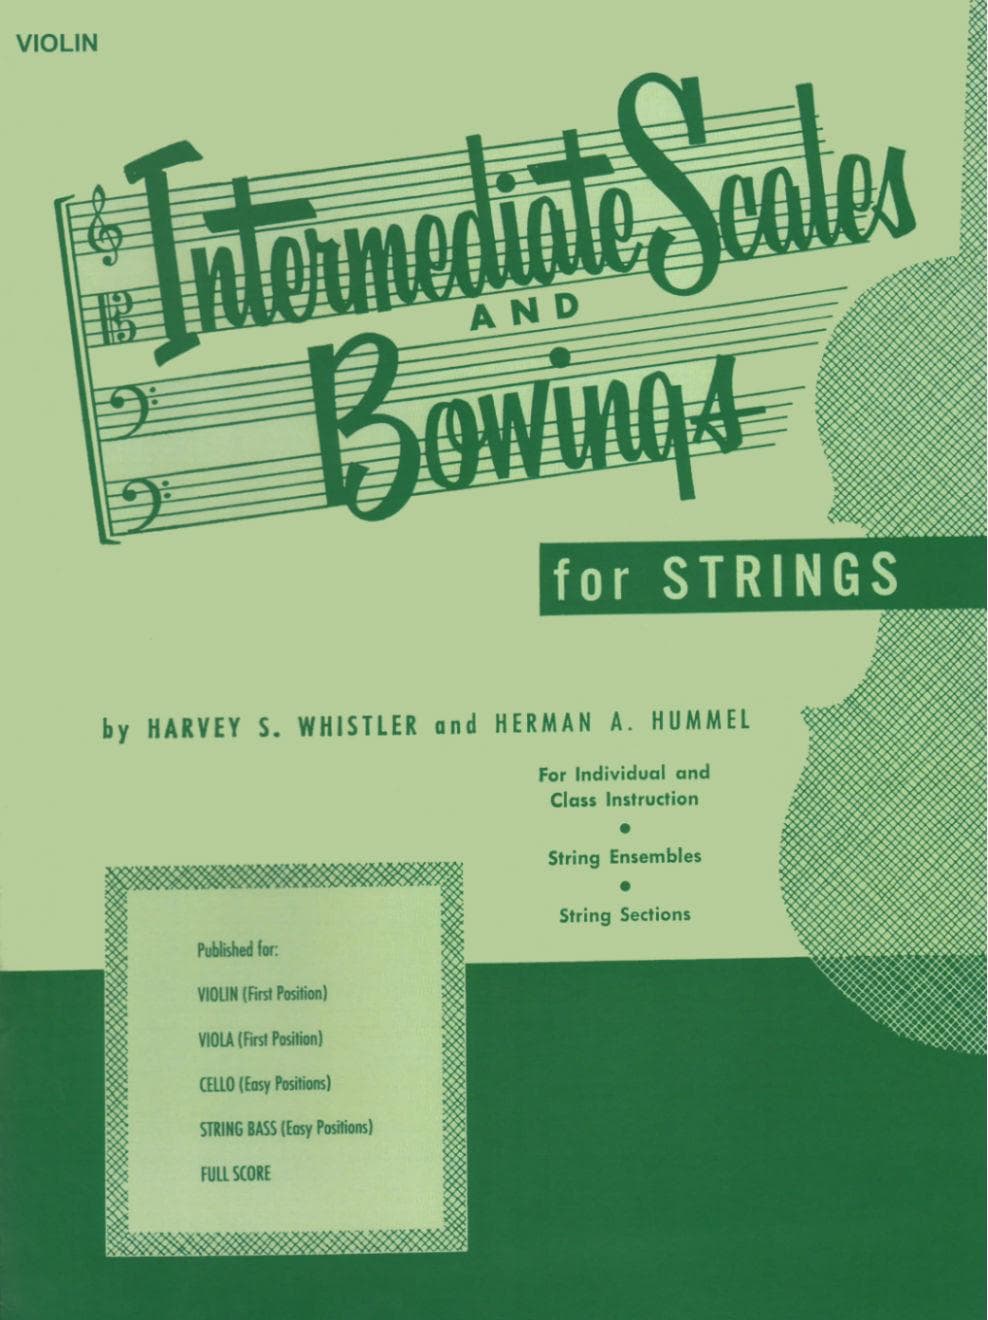 Whistler/Hummel - Intermediate Scales & Bowings, for Violin Published by Rubank Publications